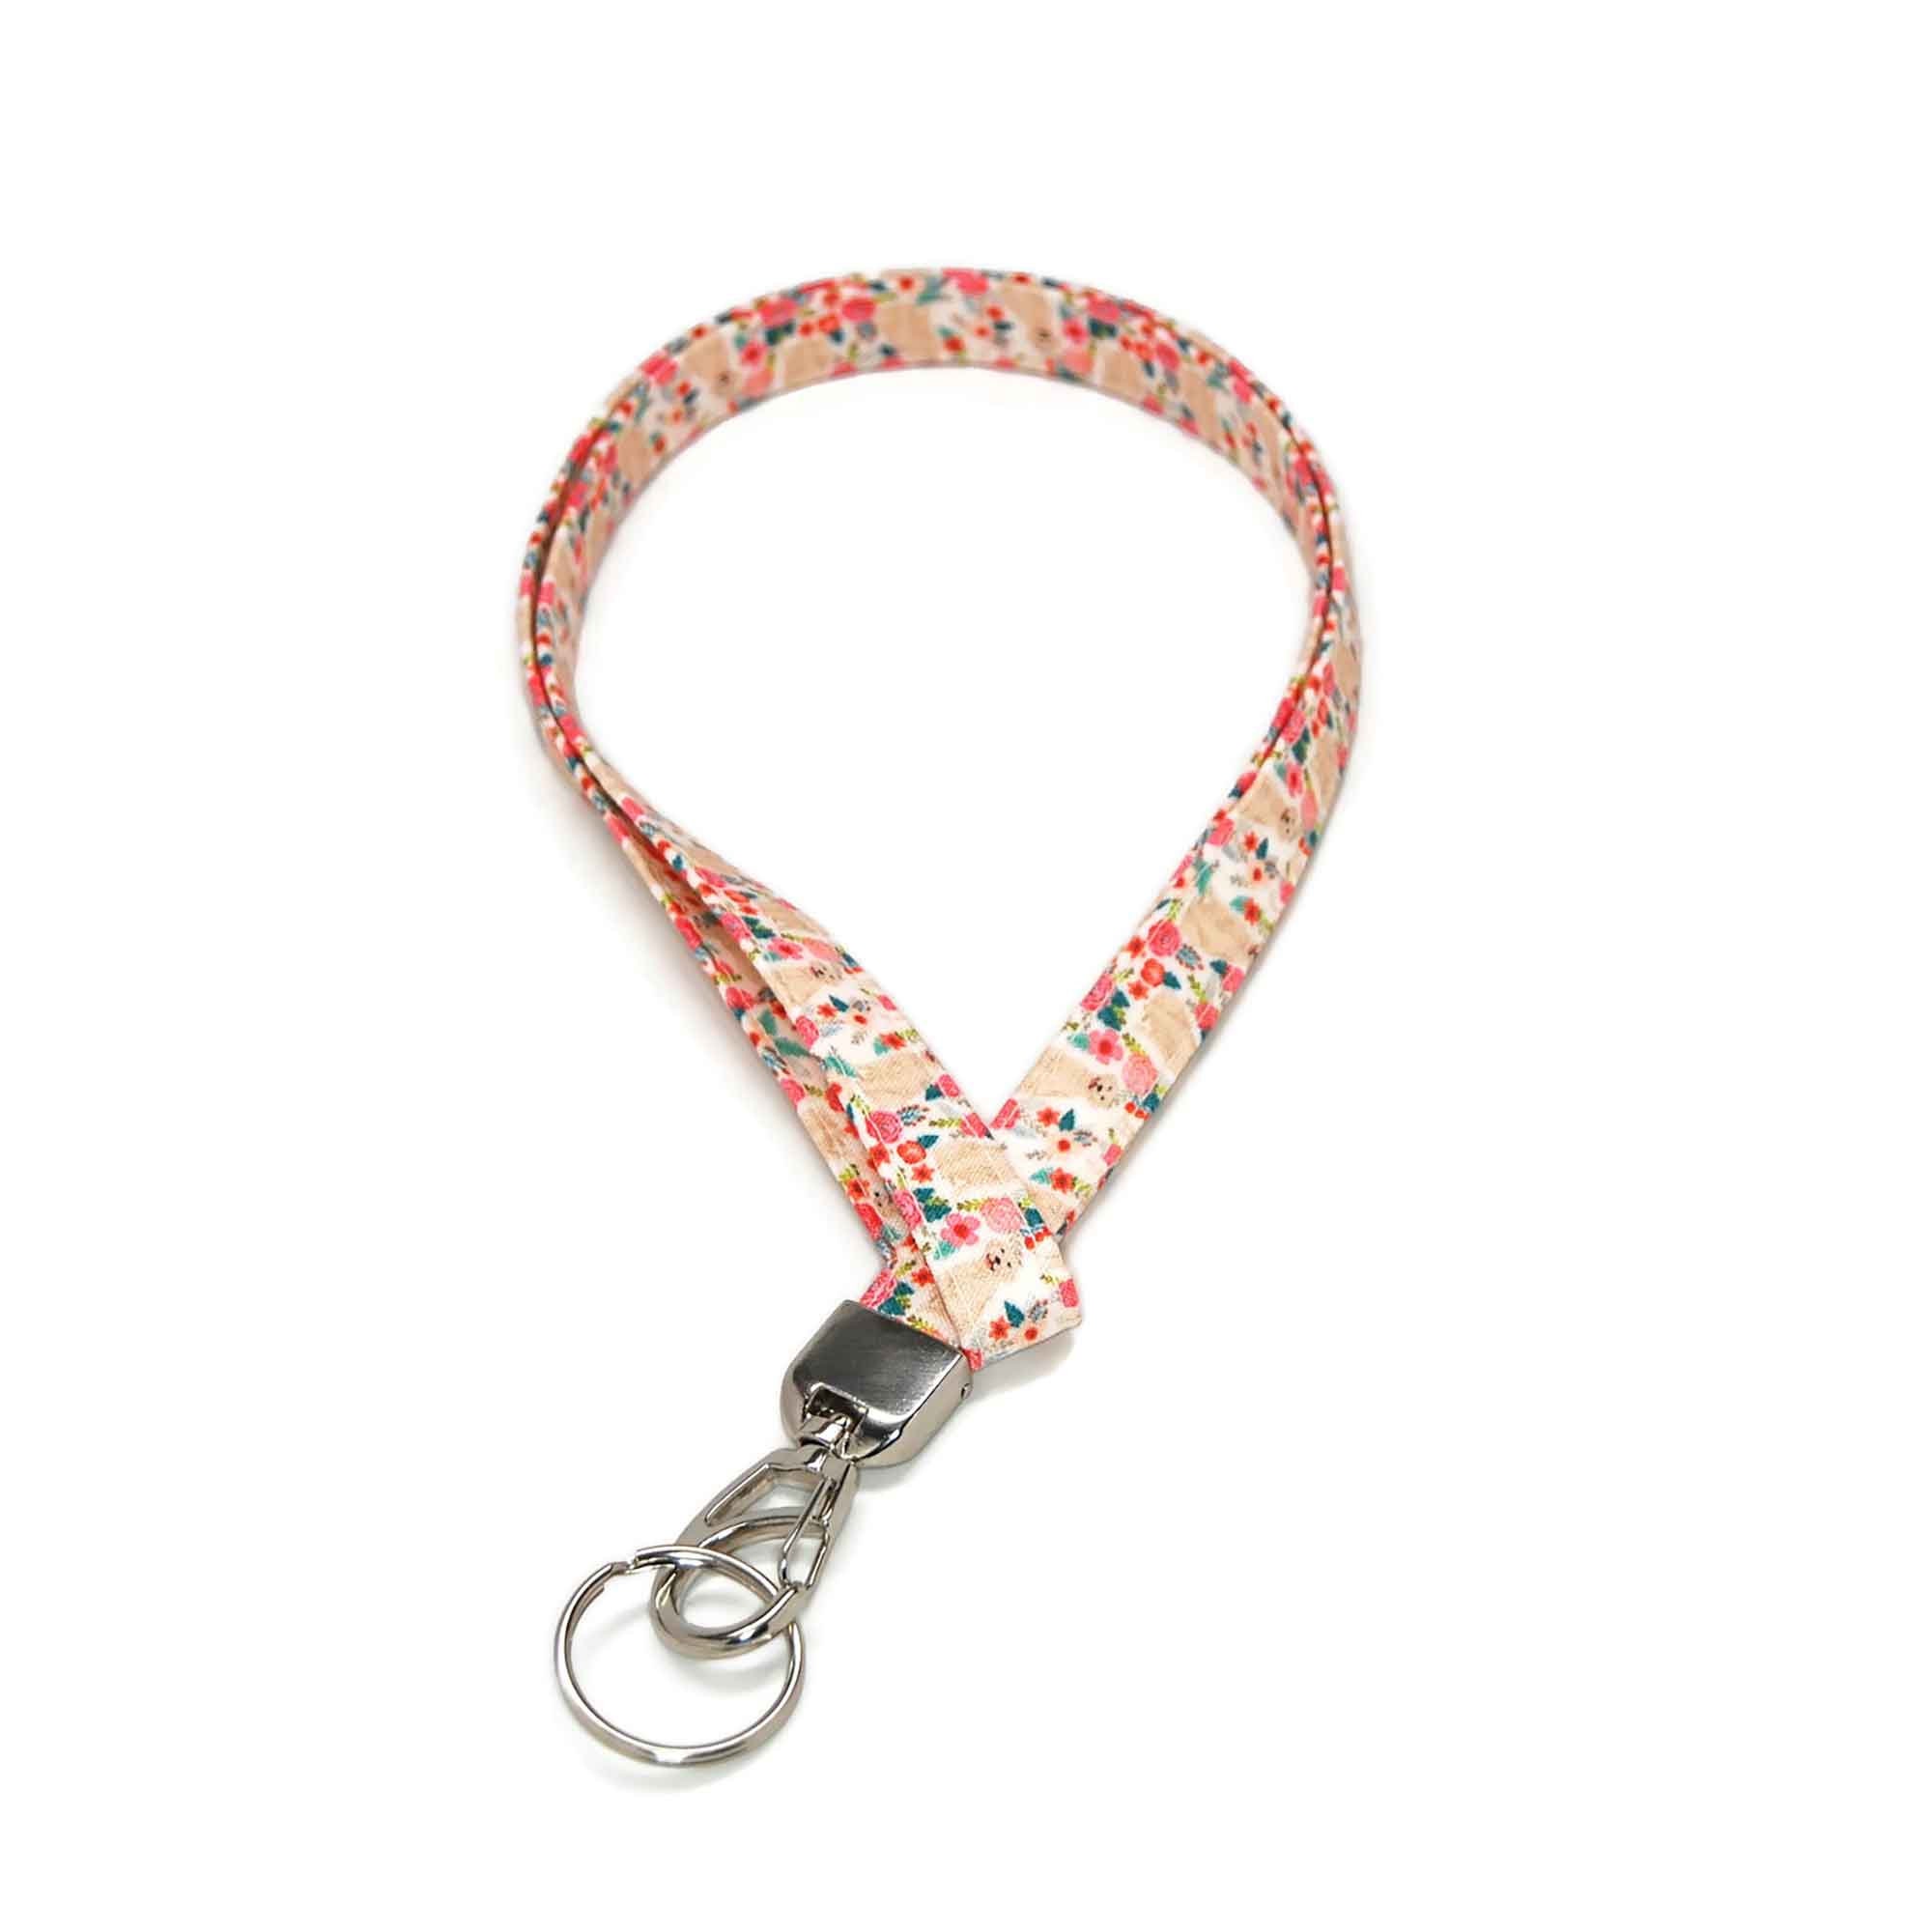  COOKOOKY Lanyard with id Holder Cute Lanyards for Women Men  Neck Lanyard for Keys id Badge Holder (Red Triangle) : Office Products